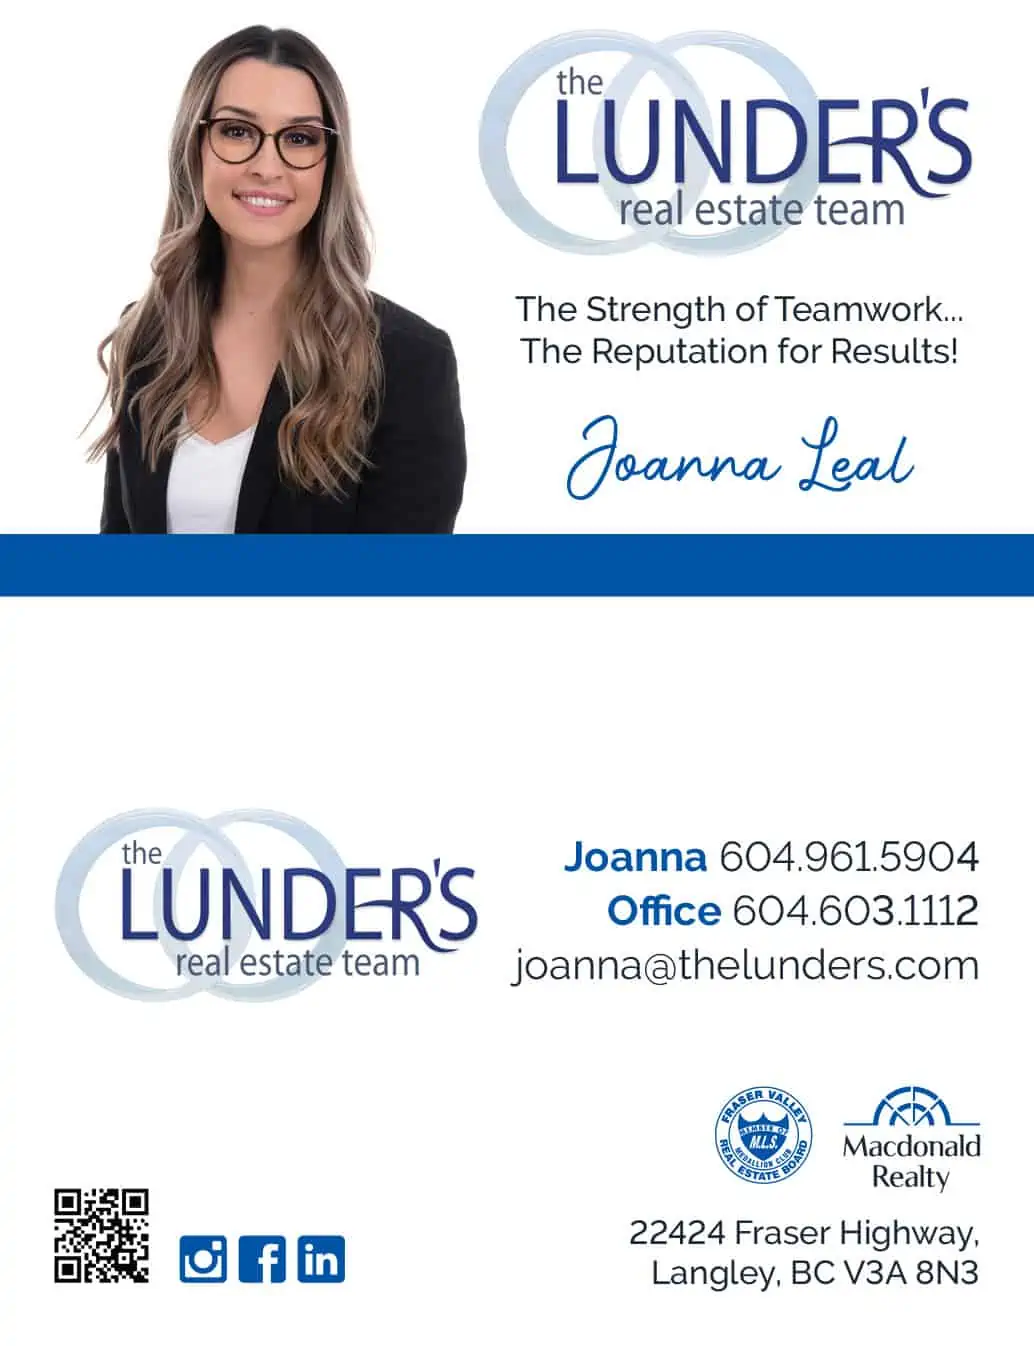 Joanna Leal, The Lunders Real Estate Team